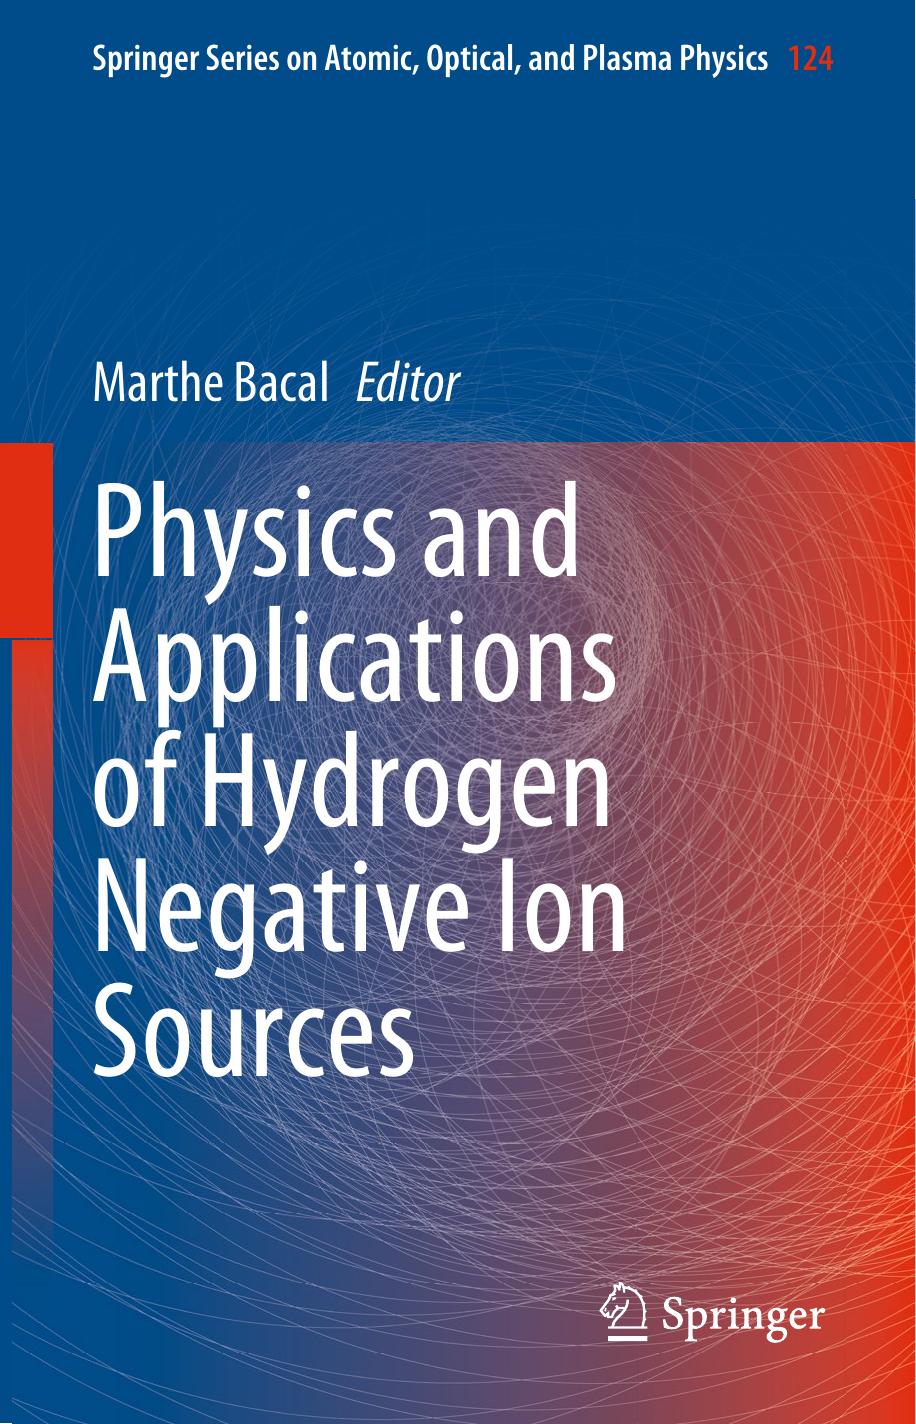 Physics and Applications of Hydrogen Negative Ion Sources by Marthe Bacal